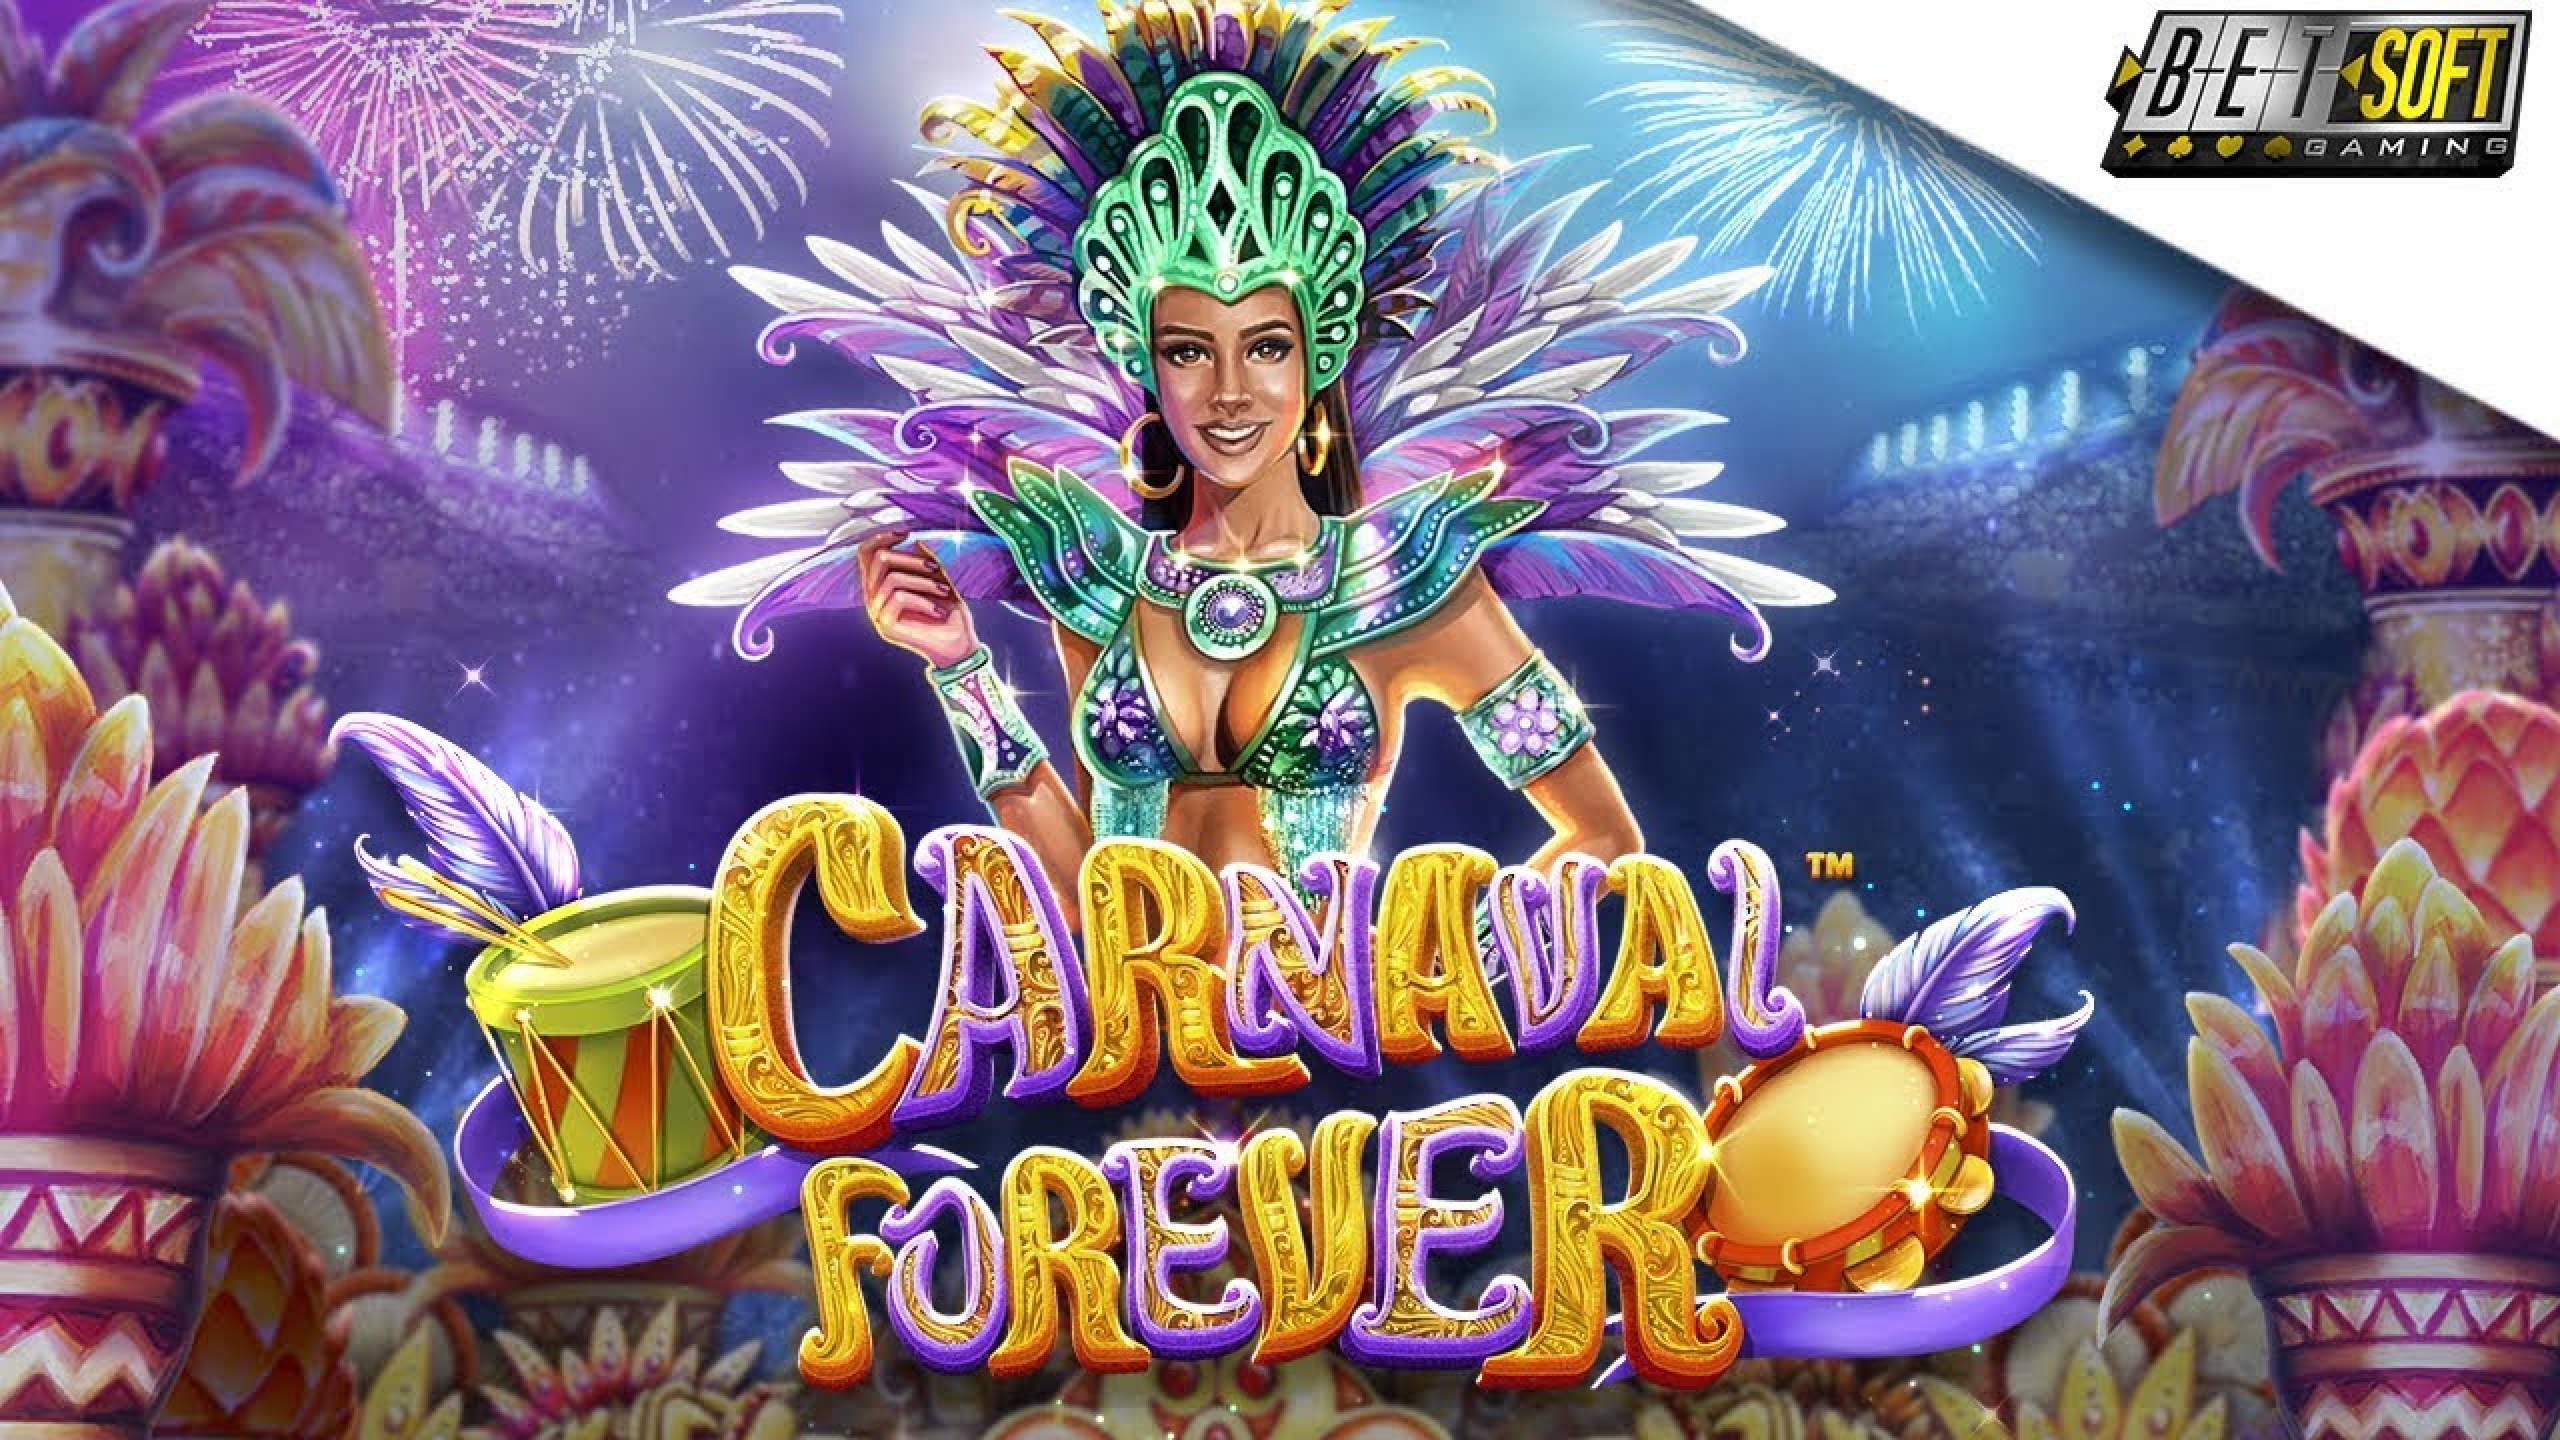 The Carnaval Forever Online Slot Demo Game by Betsoft